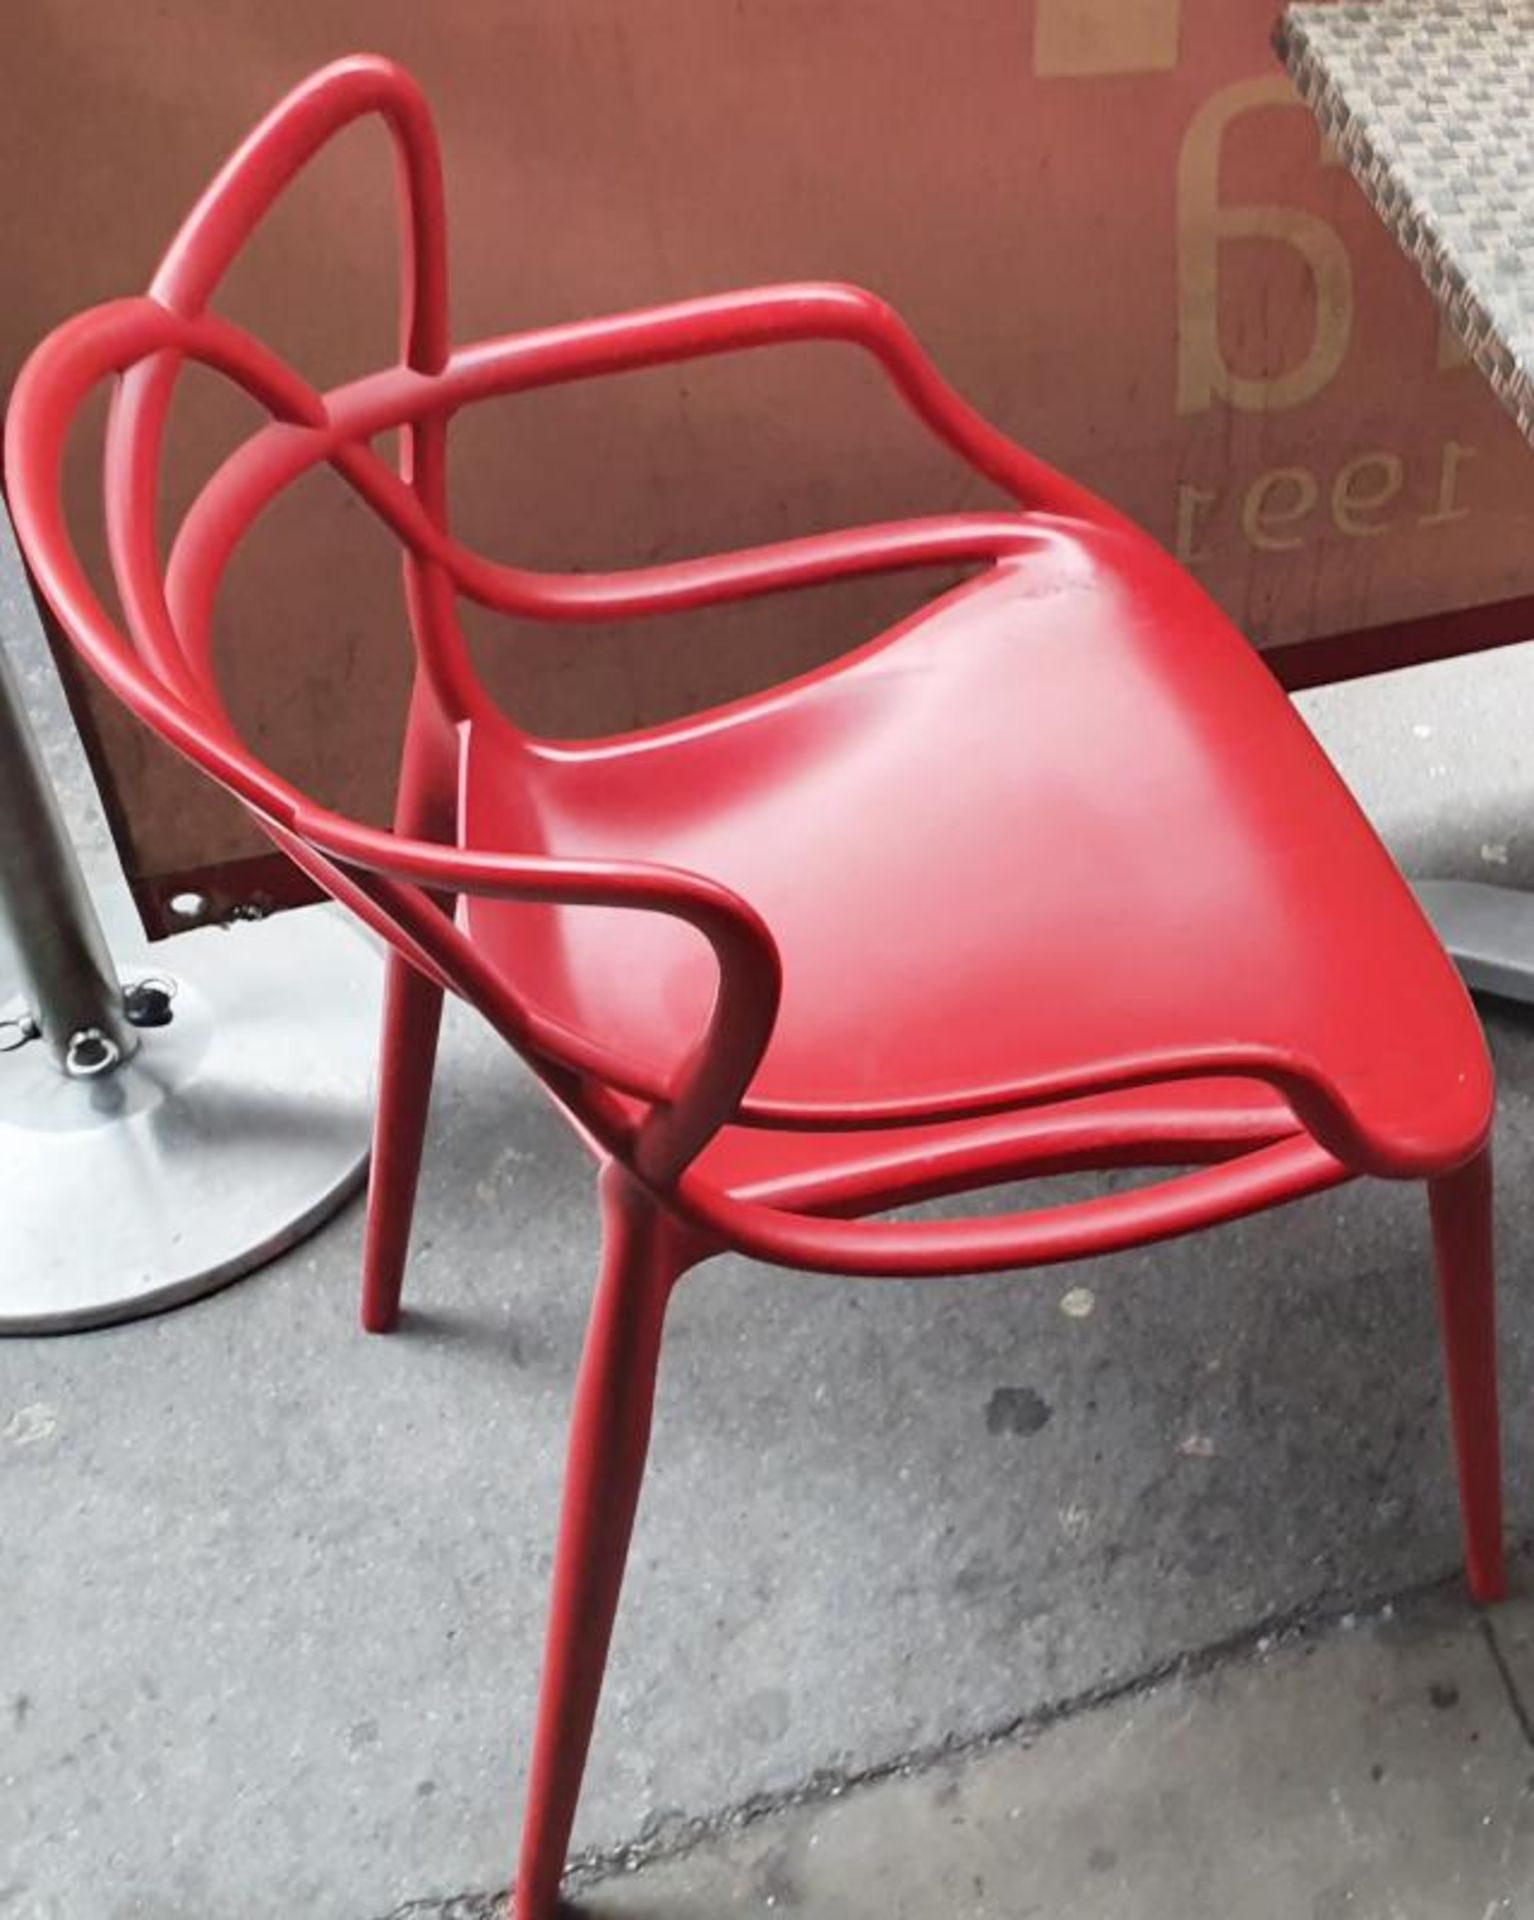 12 x Philippe Starck For Kartell 'Masters' Designer Bistro Chairs - Includes 10 x Red And 2 x Black - Bild 6 aus 6